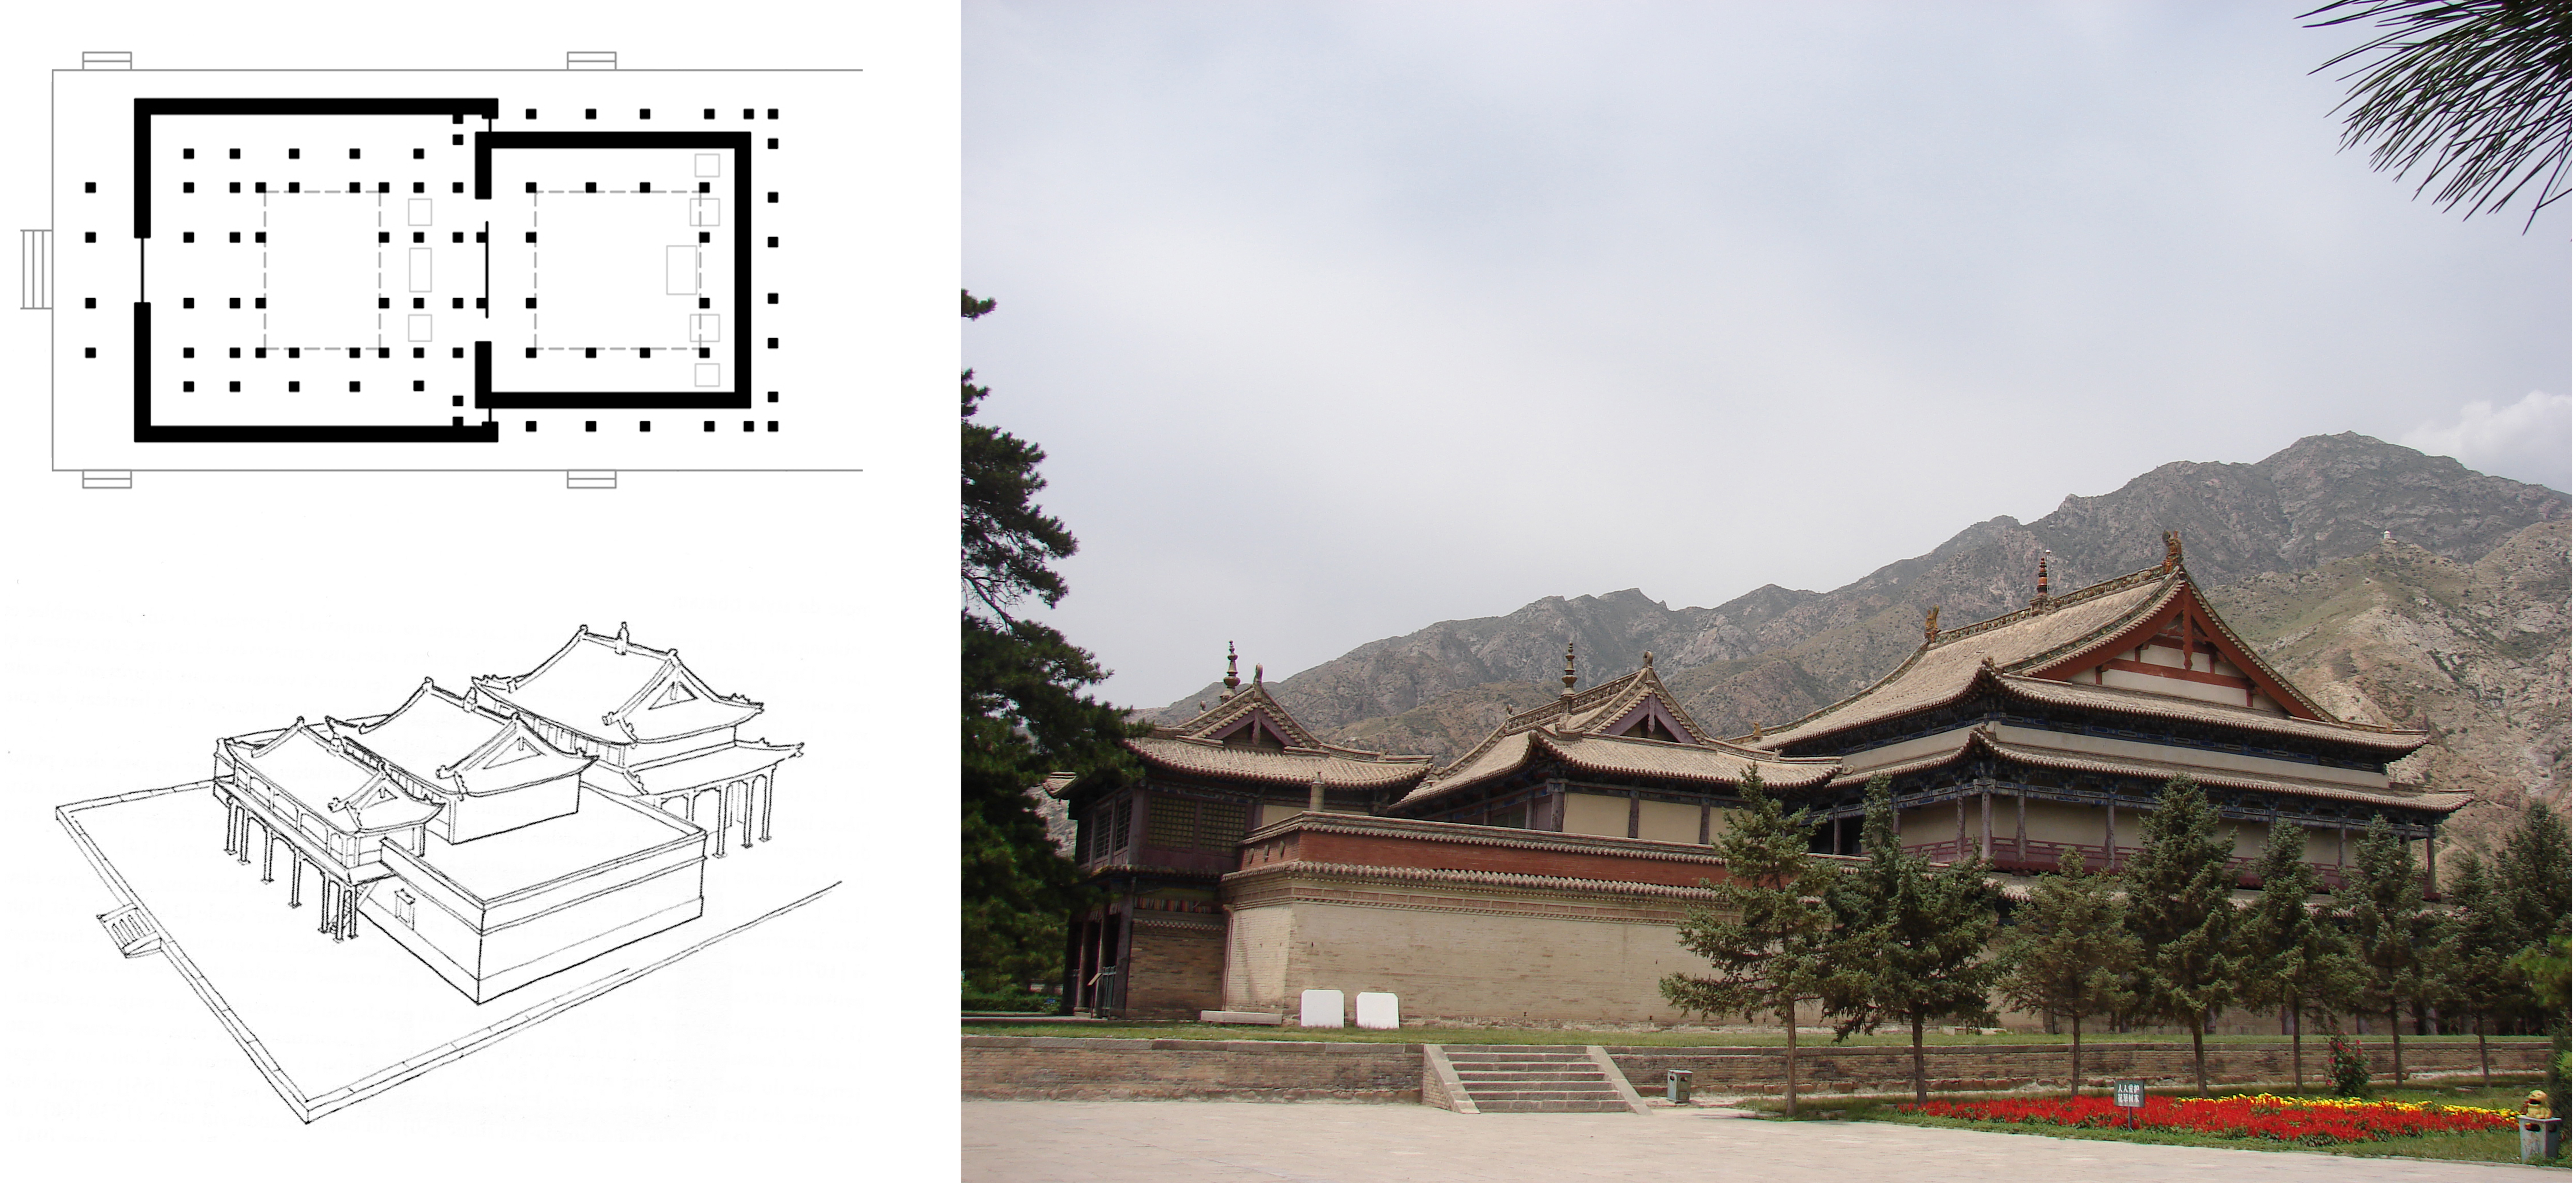 At left, floorplan and 3D diagram of temple complex; at right, photograph of temple complex before mountain range